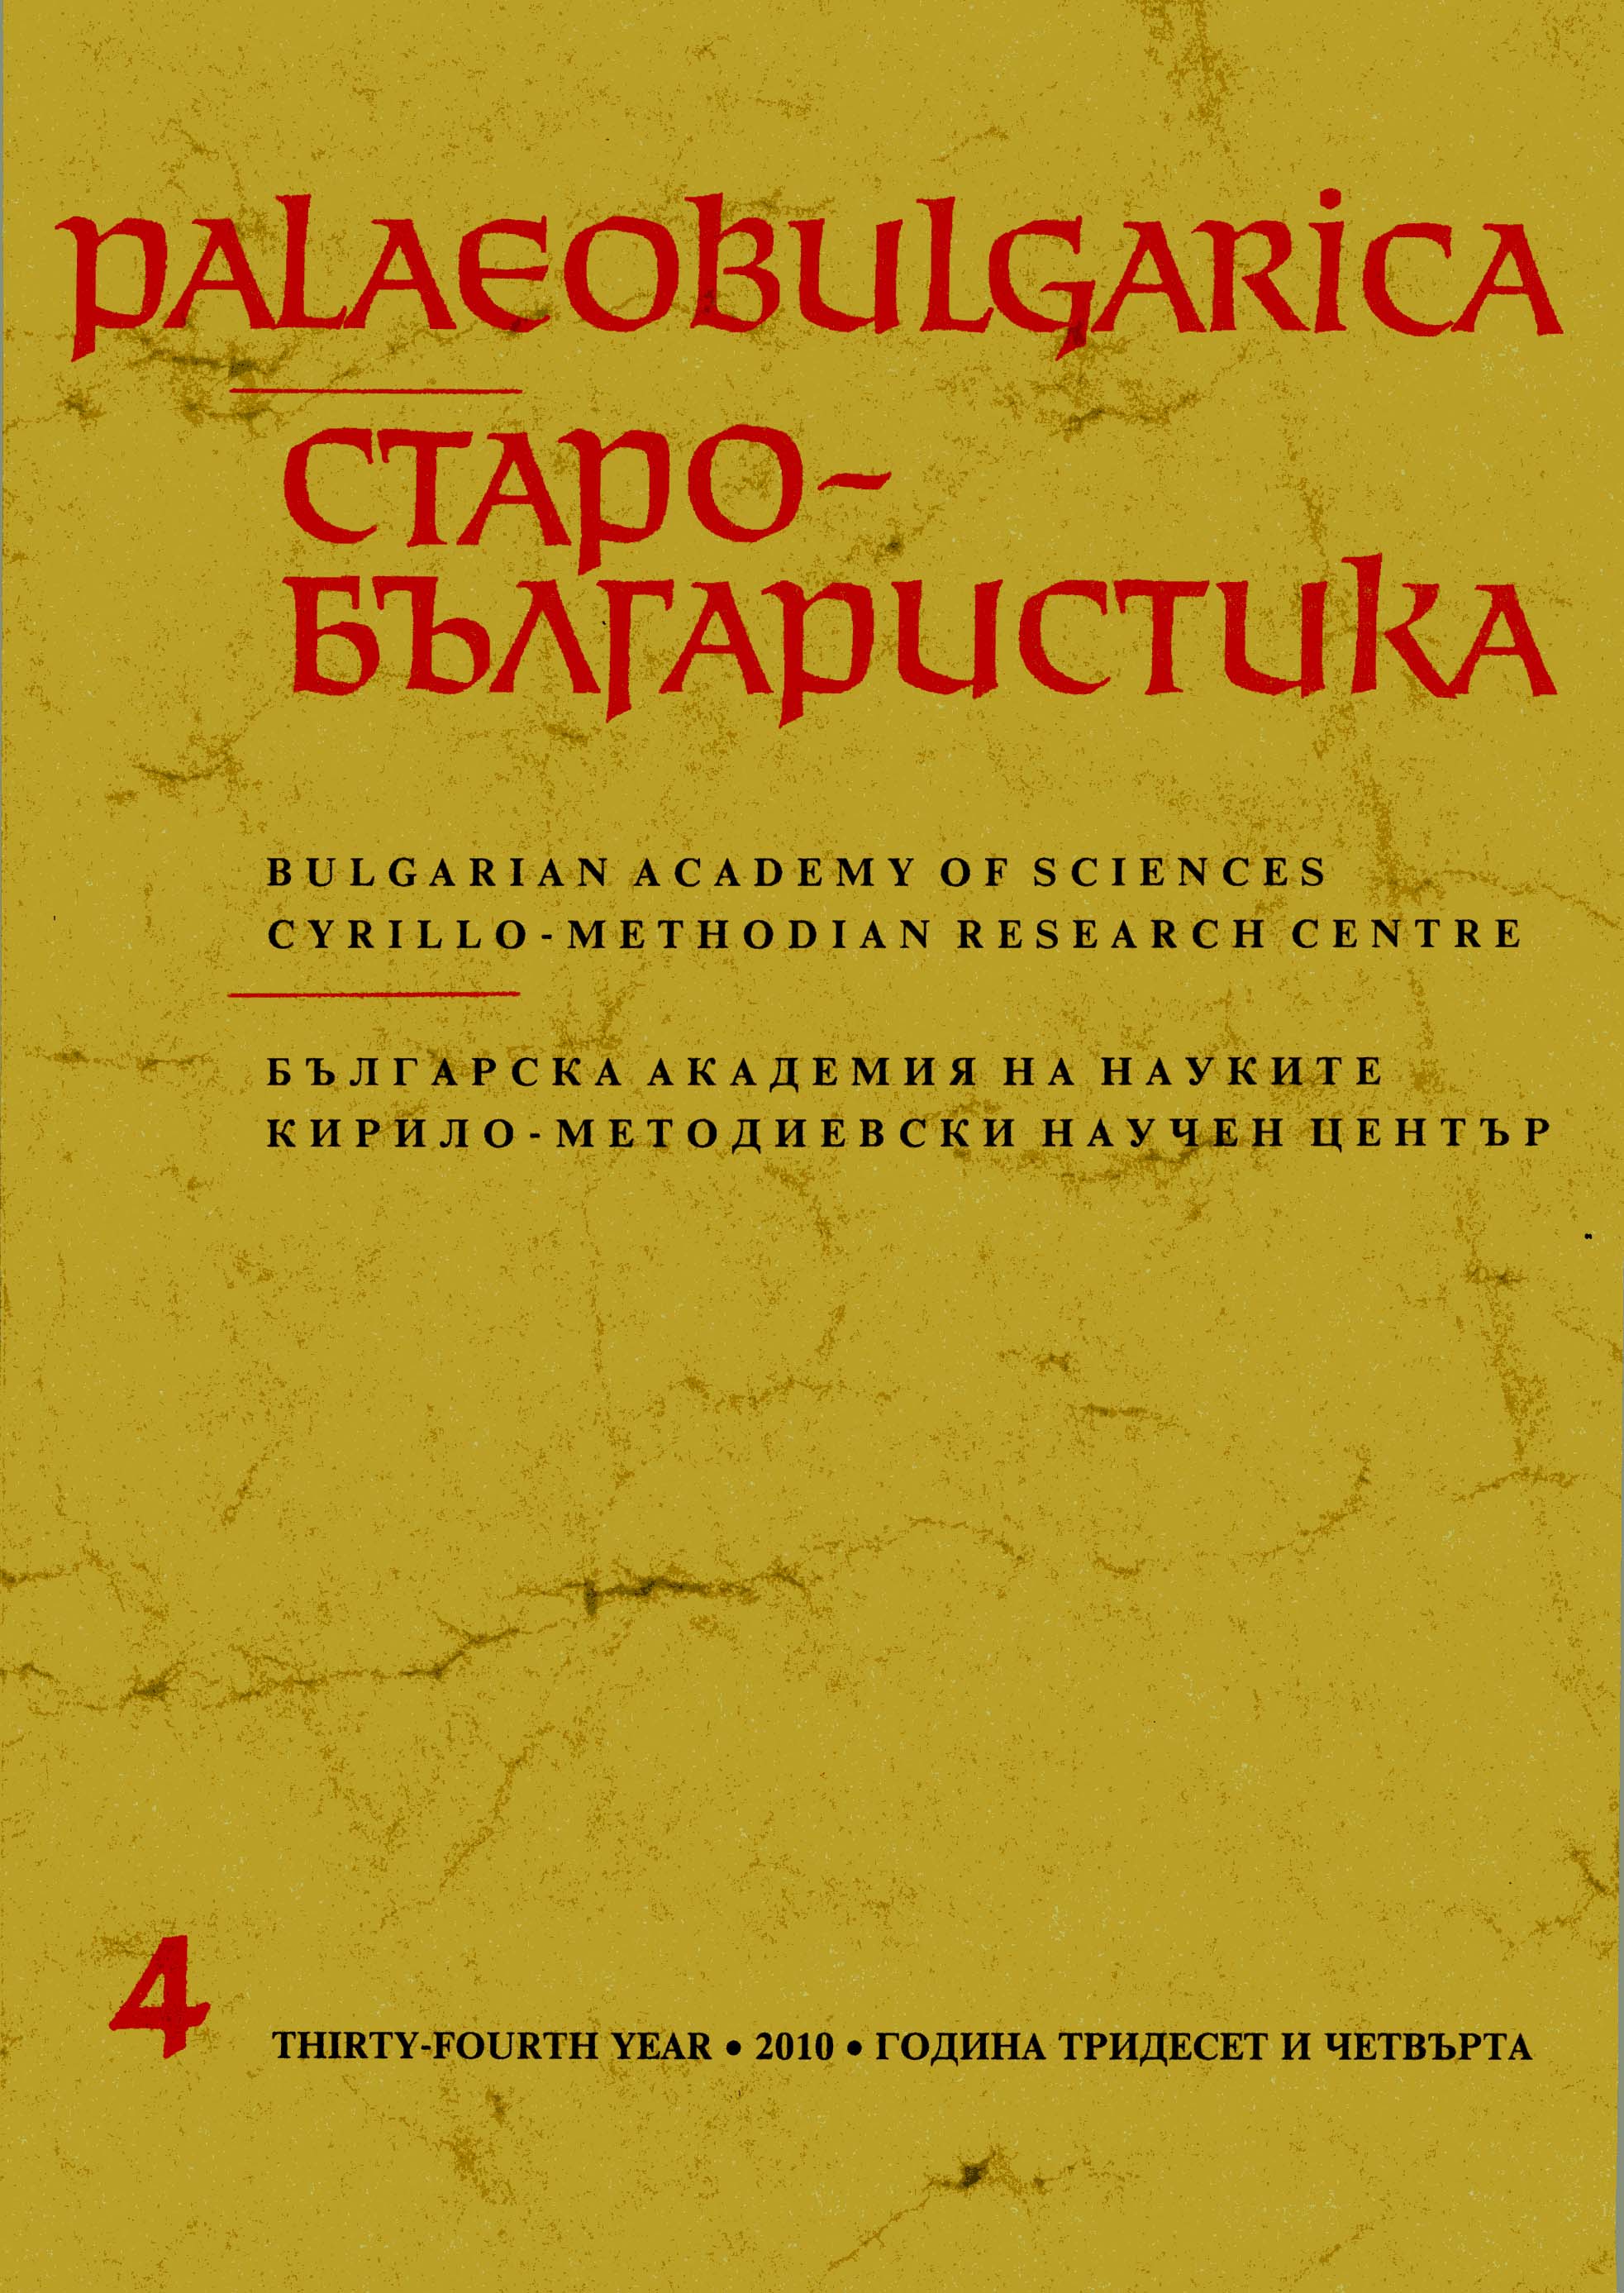 A Philological Contribution to the Study of the Institutional Development of the Early Mediaeval Bulgarian Khaganate-Kingdom Cover Image